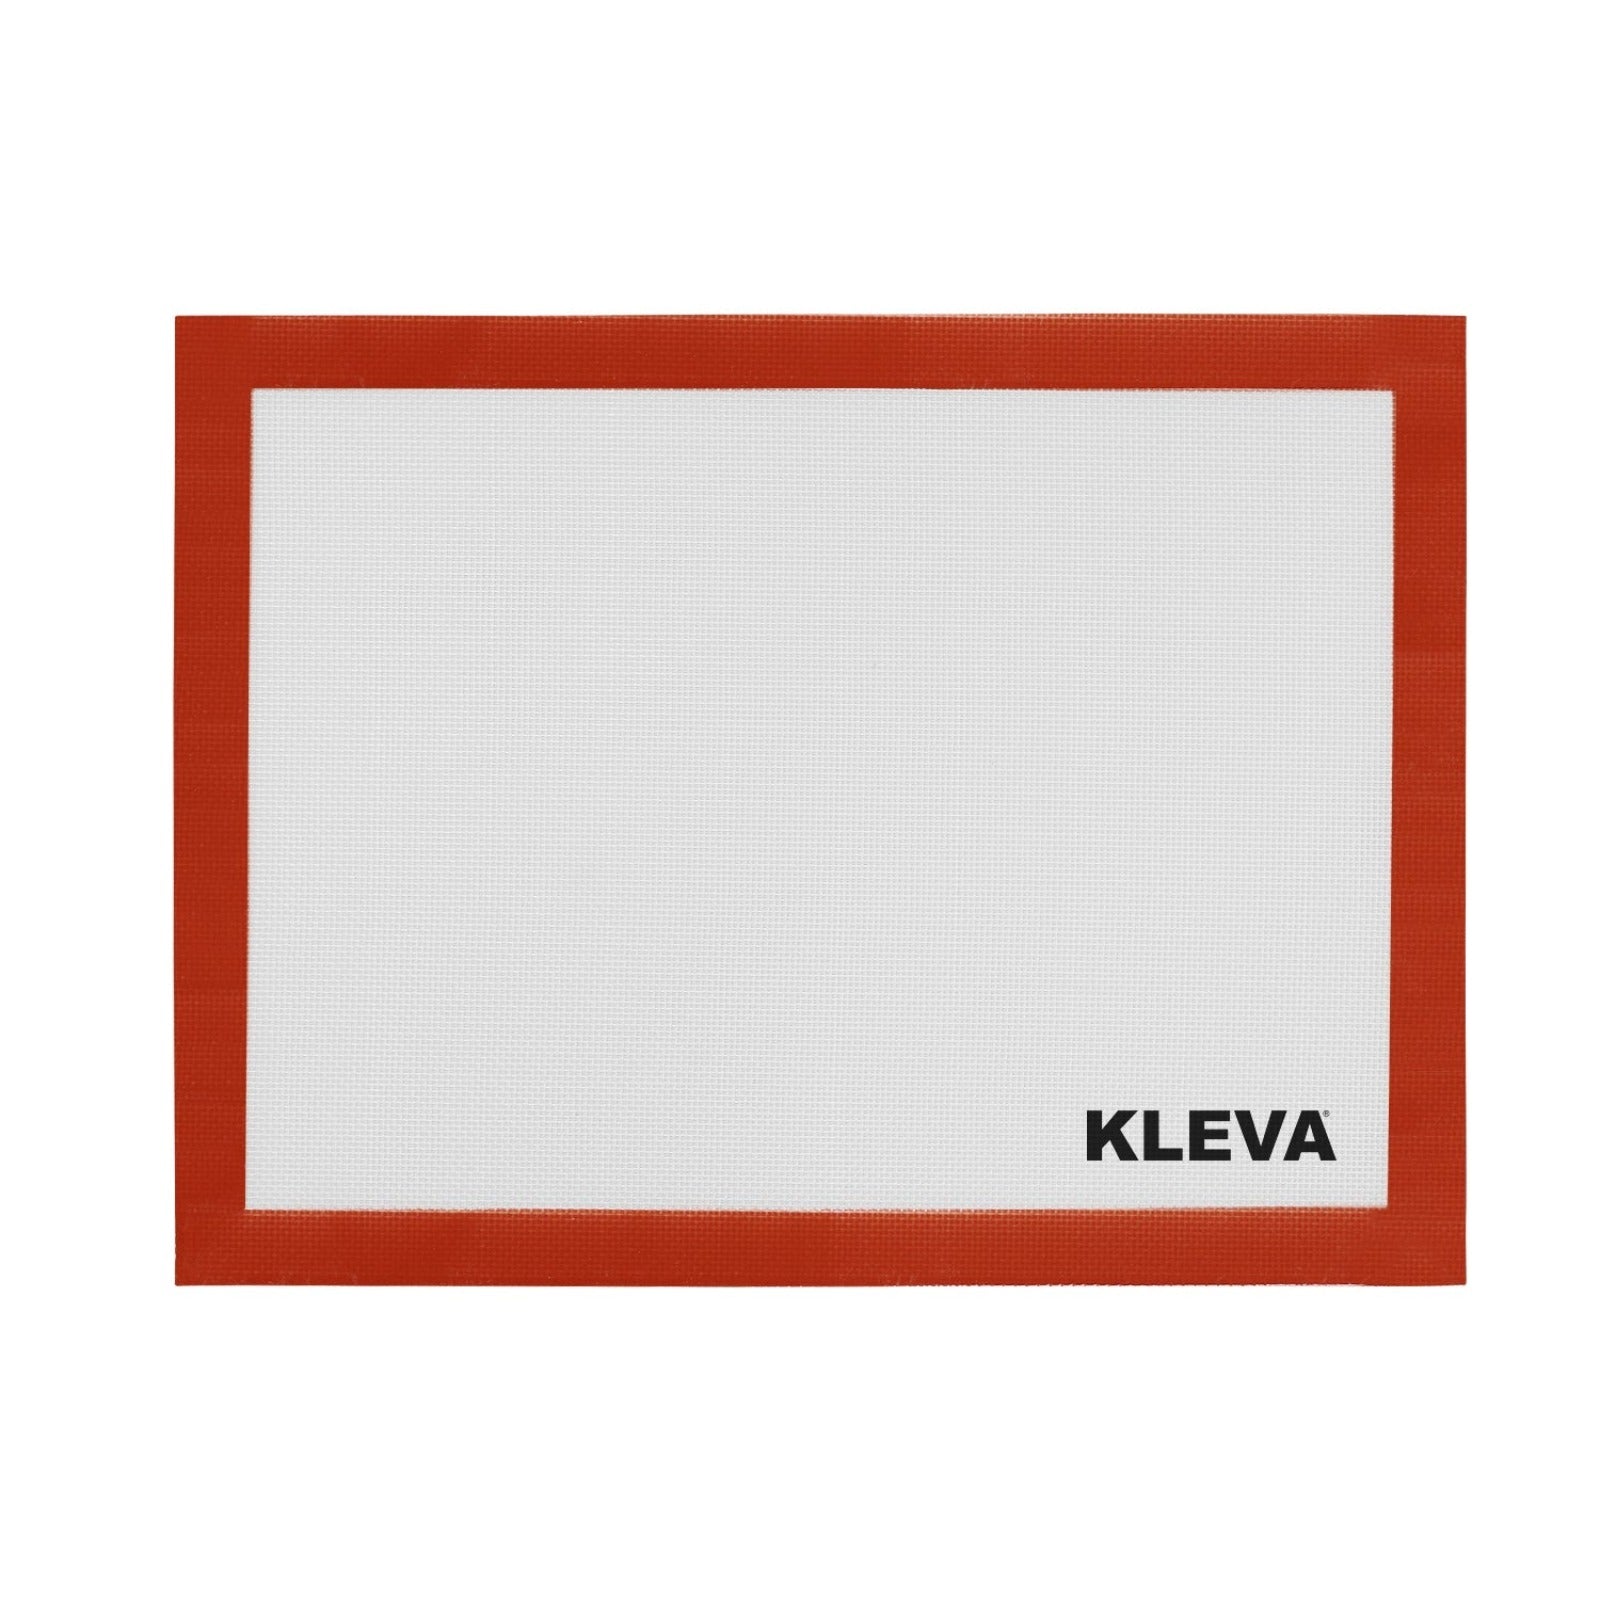 Kleva® Silicone Baking Mat - Bake, Cook & Clean Easier With No Fats Or Oils!  Bunnings Marketplace   